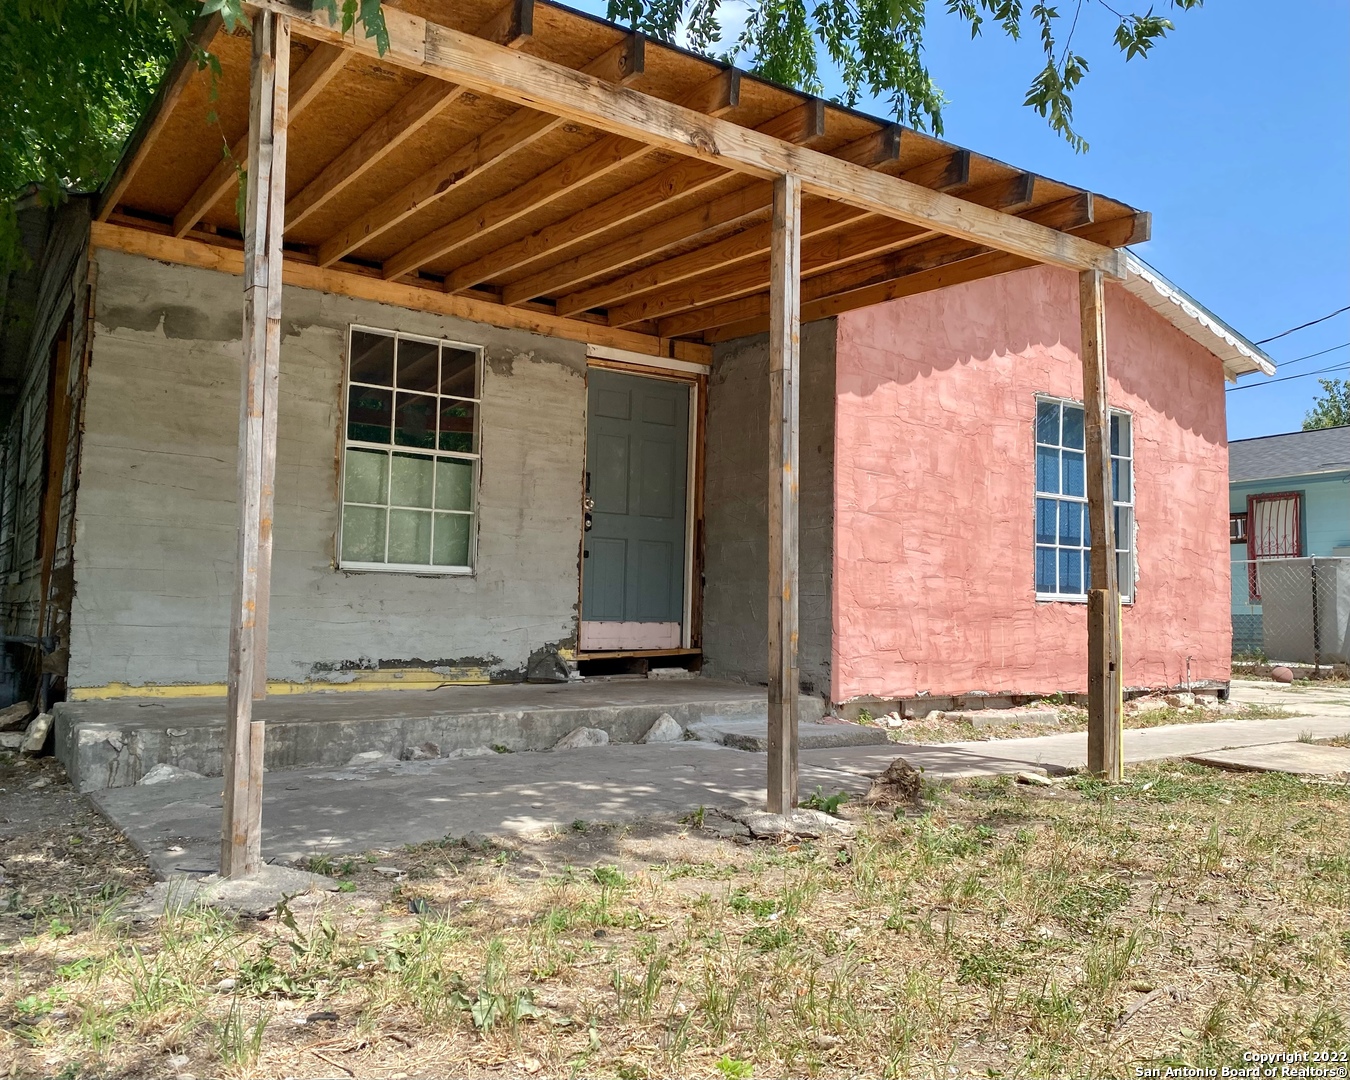 Are you an investor looking for a potential income producing property in SA?  This property is nestled on 2 lots that has a tremendous bonus of having a registered BEXAR County CAD 2nd living improvement aka the casita in the back! Both structures could be a great income potential because it is walking distance from HEB, businesses, restaurants, and quick access to HWY 90.  Only 10-14 minutes from The Alamo/Riverwalk/Missions/The Pearl makes this a great Airbnb potential or maybe you decide to rent out each structure and gain dividends that way. The ARV possibilities for investors are endless with this 2 lot property located in a developing area with No HOA!